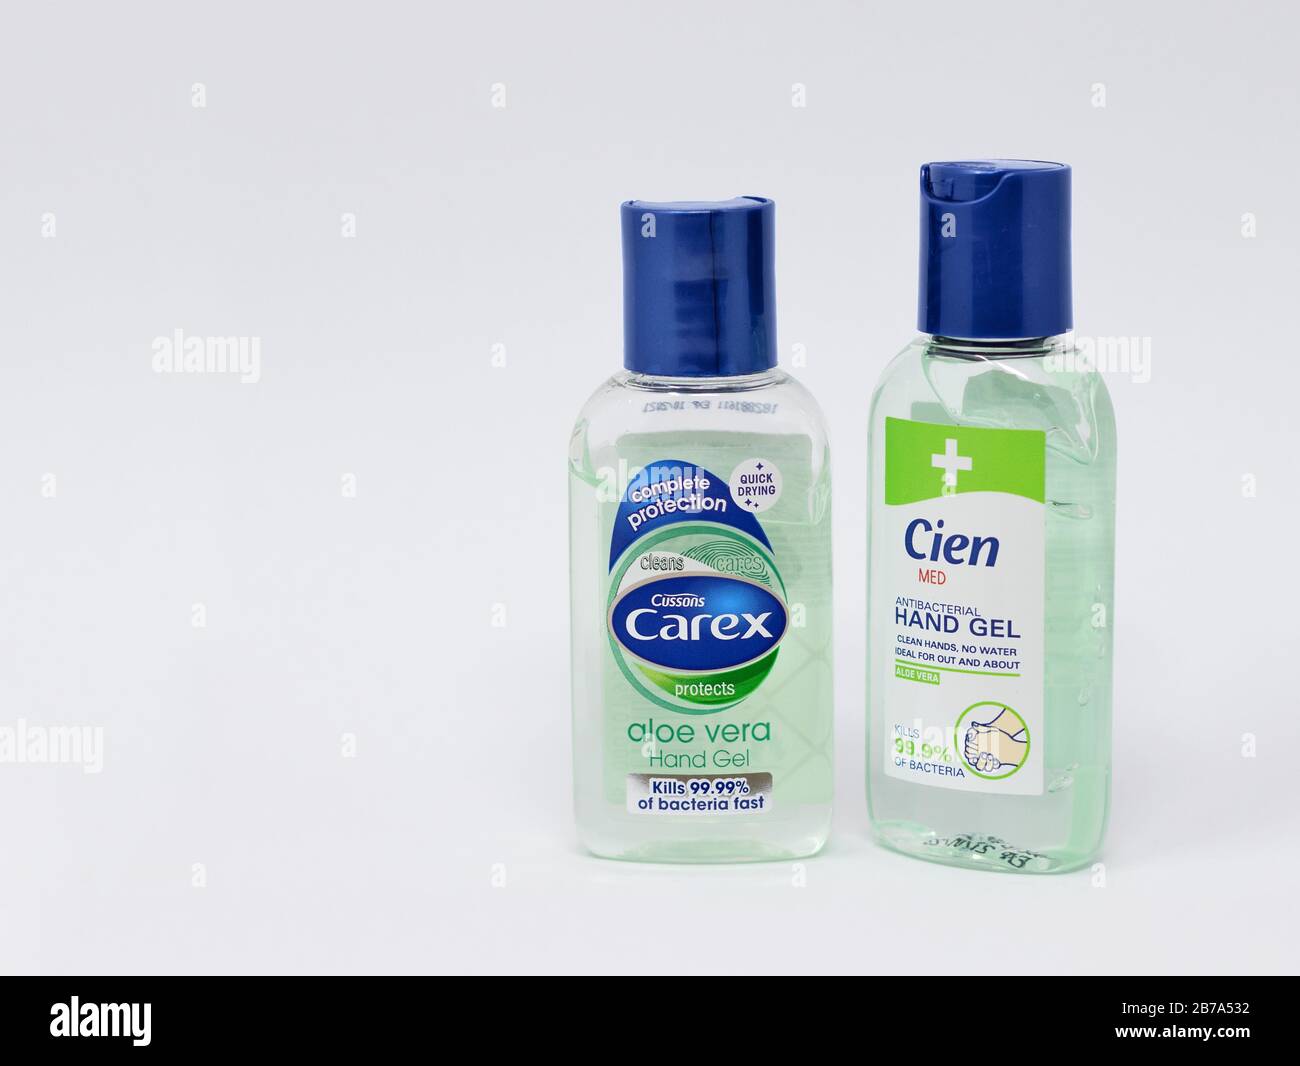 London / UK - March 9th 2020  - Two bottles of antibacterial hand sanitiser gel from Carex and Cien brands on a white background Stock Photo